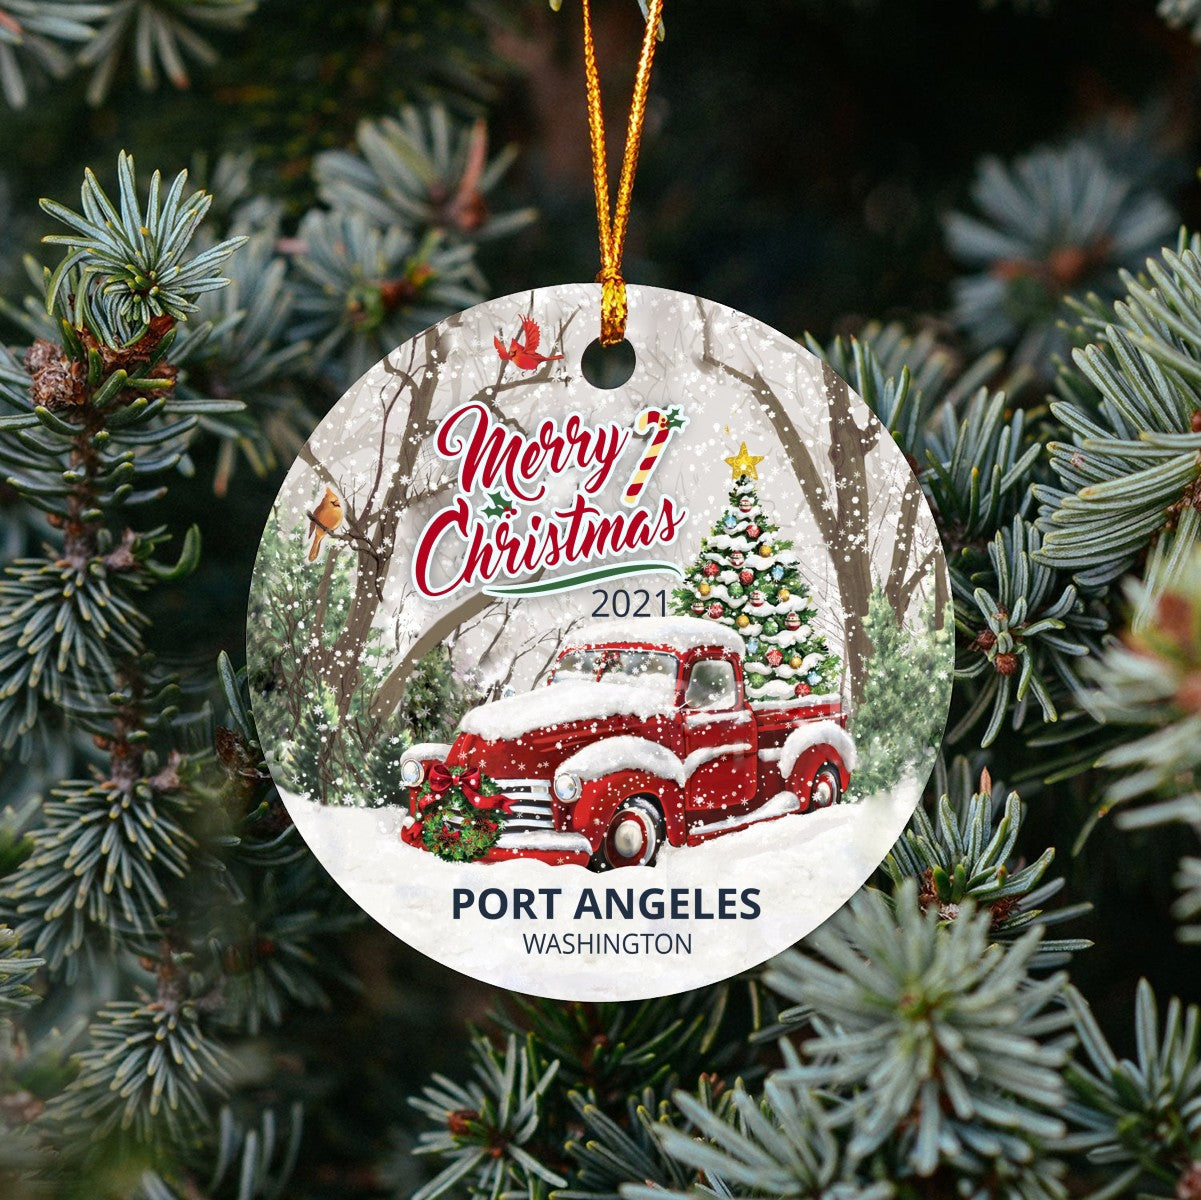 Christmas Tree Ornaments Port Angeles - Ornament Customize With Name City And State Port Angeles Washington WA - Red Truck Xmas Ornaments 3'' Plastic Gift For Family, Friend And Housewarming